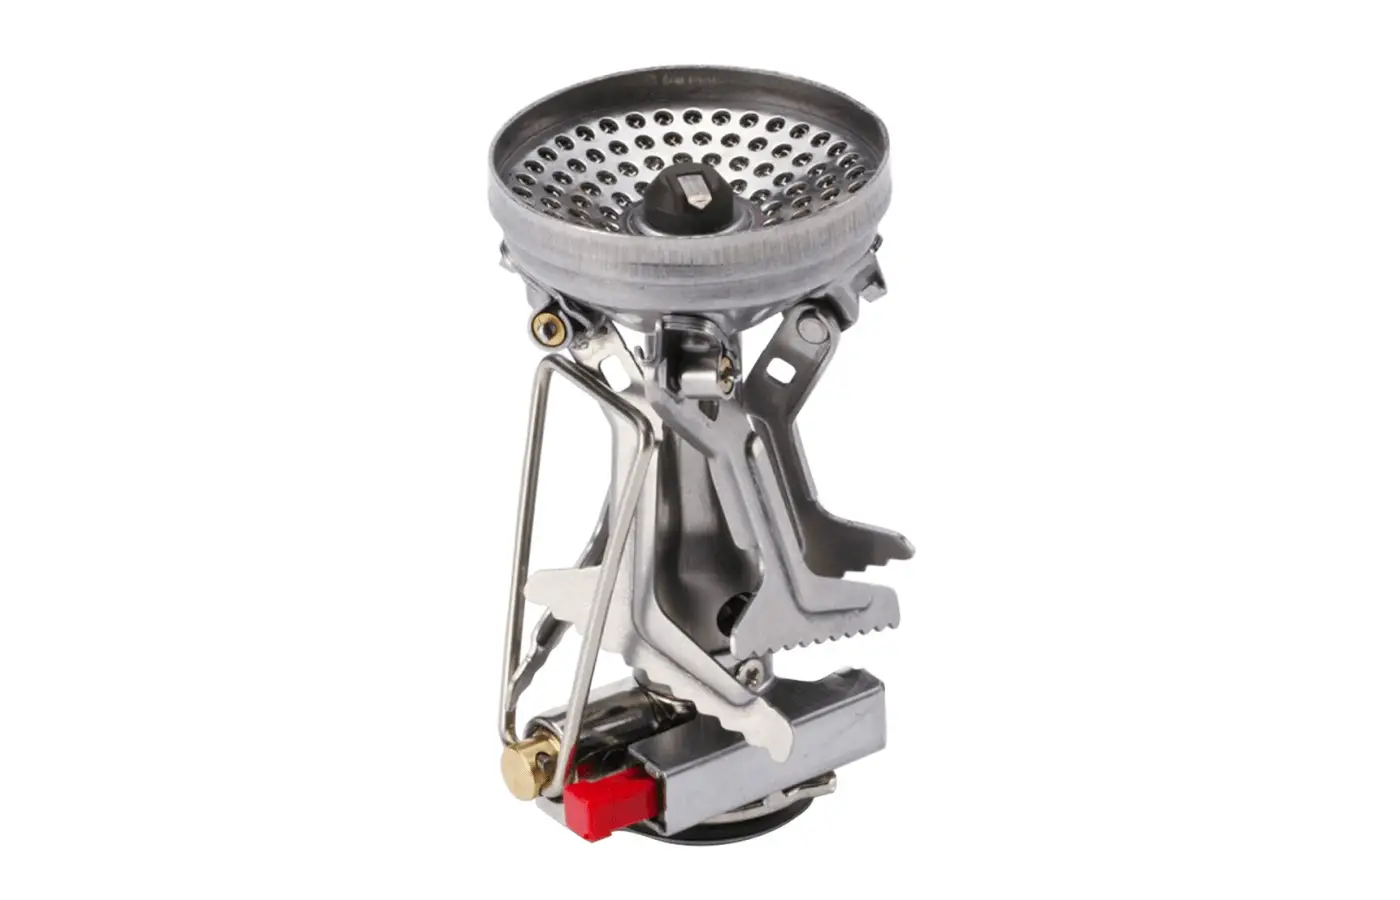 SOTO Amicus Stove with or Without Igniter